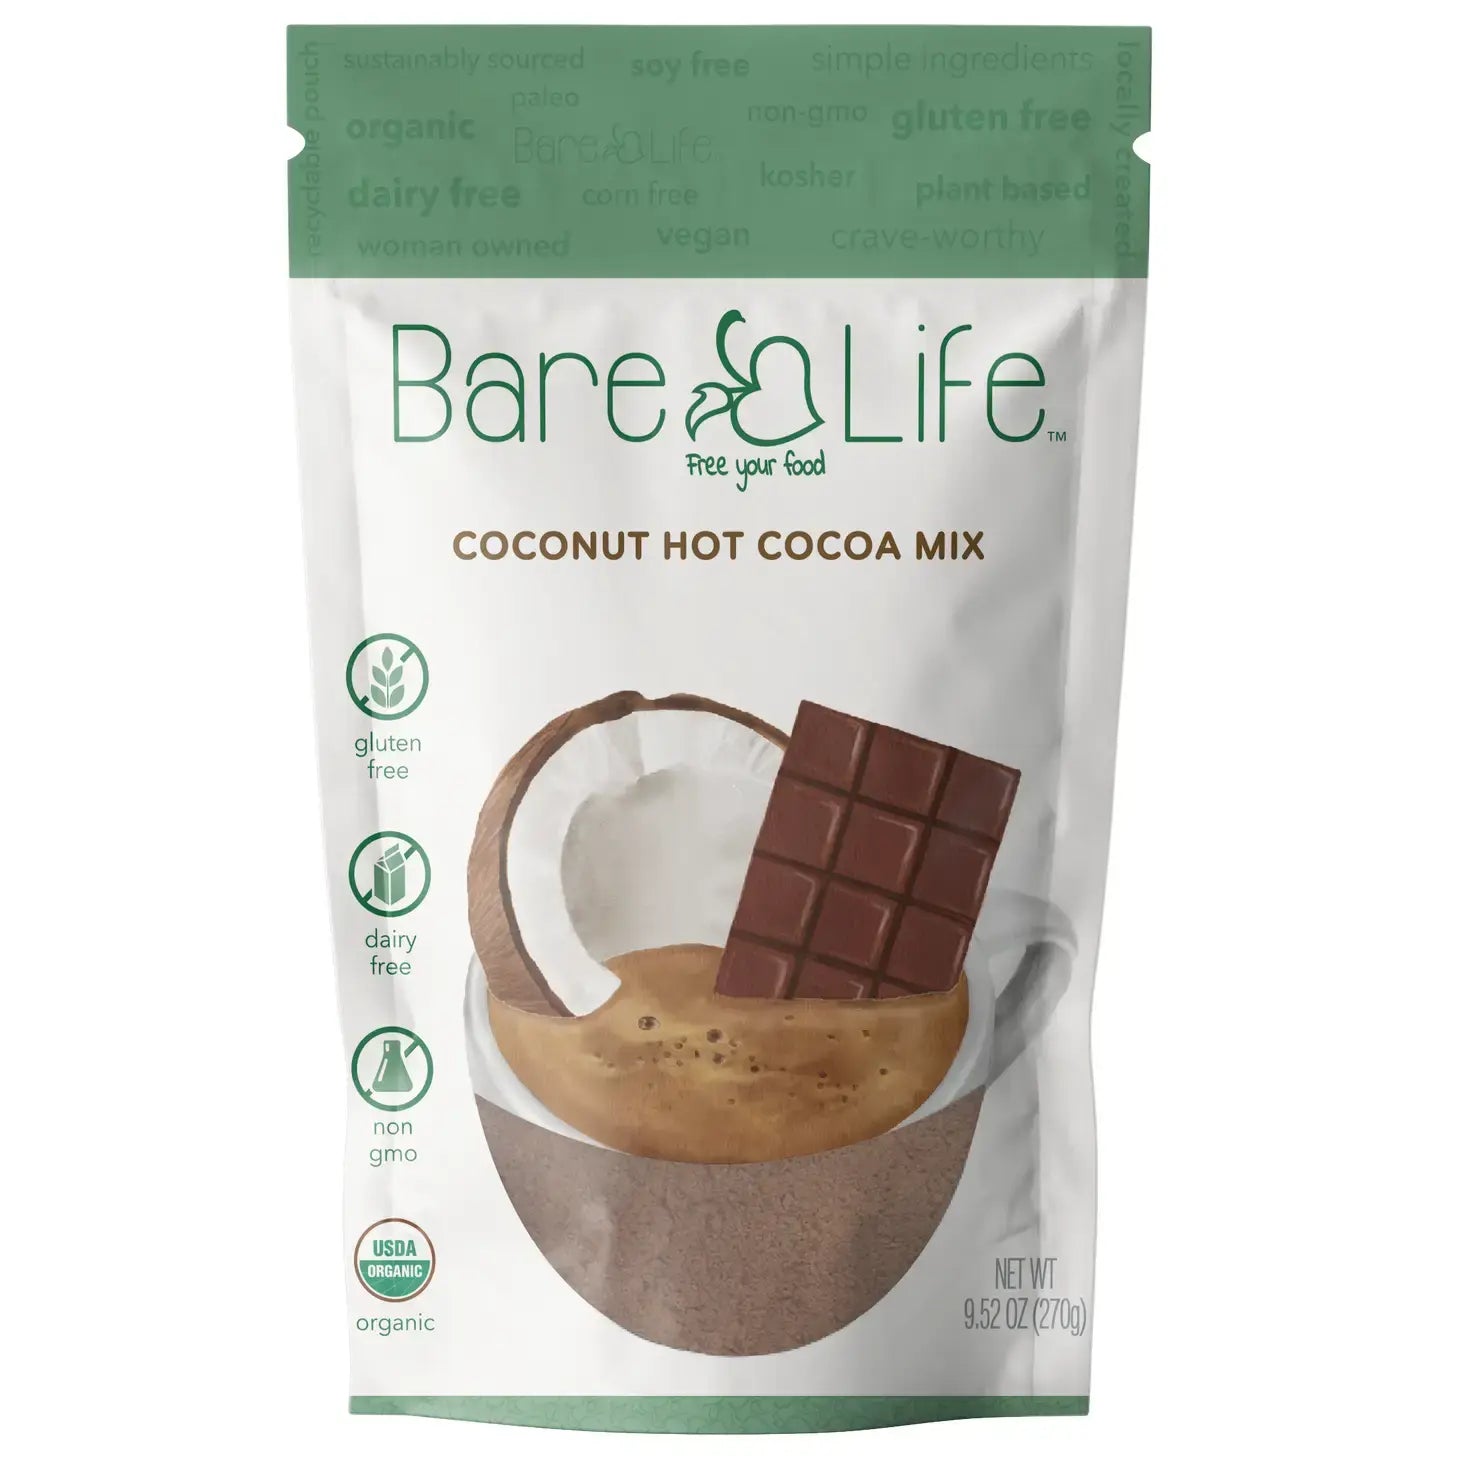 Bare Life Dairy Free & Vegan Coconut Hot Cocoa Mix 10-serving pouch